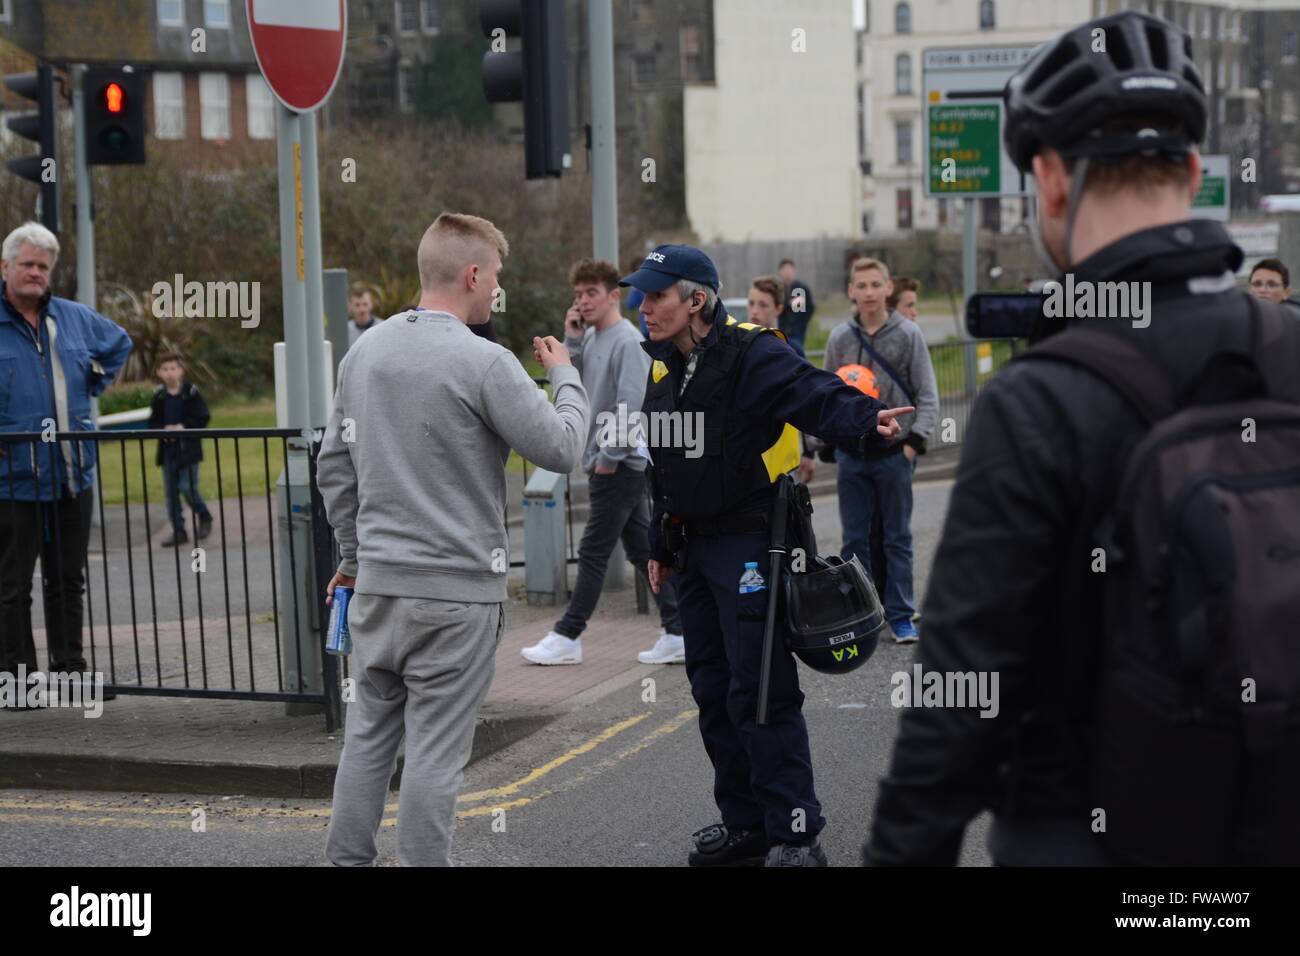 Dover, UK. 2nd April 2016. Clashes As Pro and Anti-refugee groups clash in Dover.  Police officer reprimands a member of the public for spitting at a police horse. Credit: Marc Ward/Alamy Live News Stock Photo